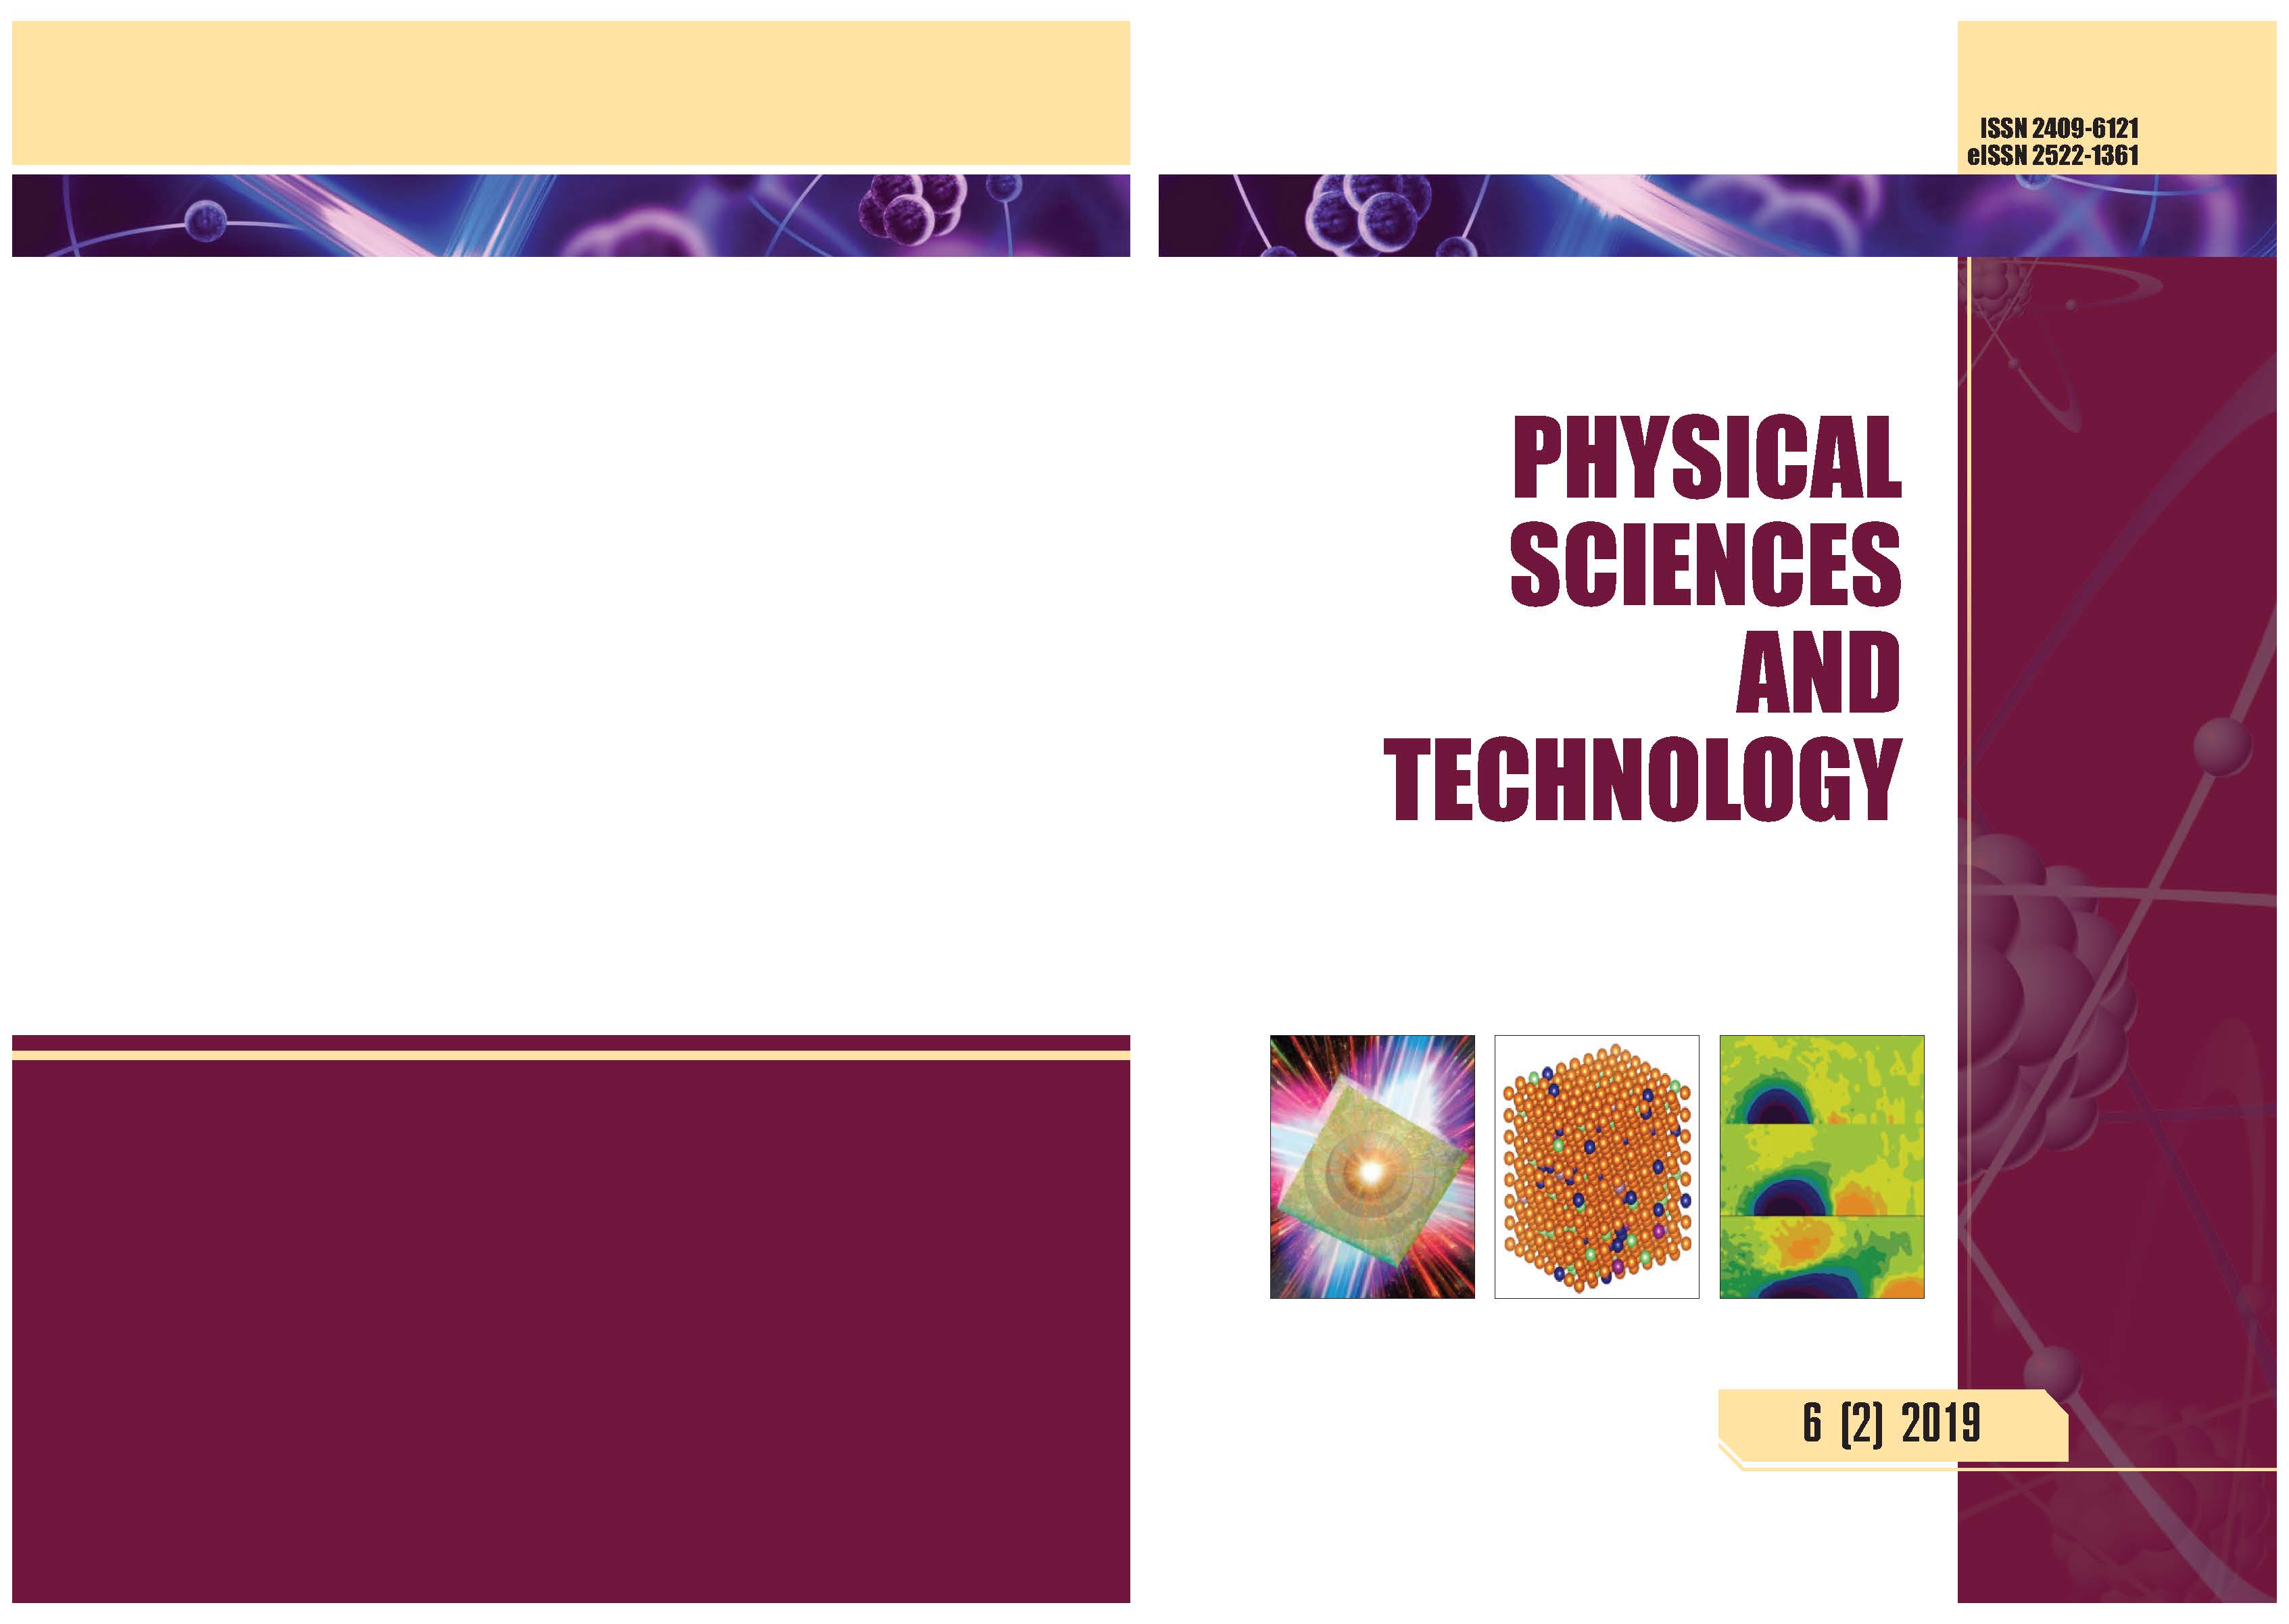 					View Vol. 6 No. 3-4 (2019): PHYSICAL SCIENCES AND TECHNOLOGY
				